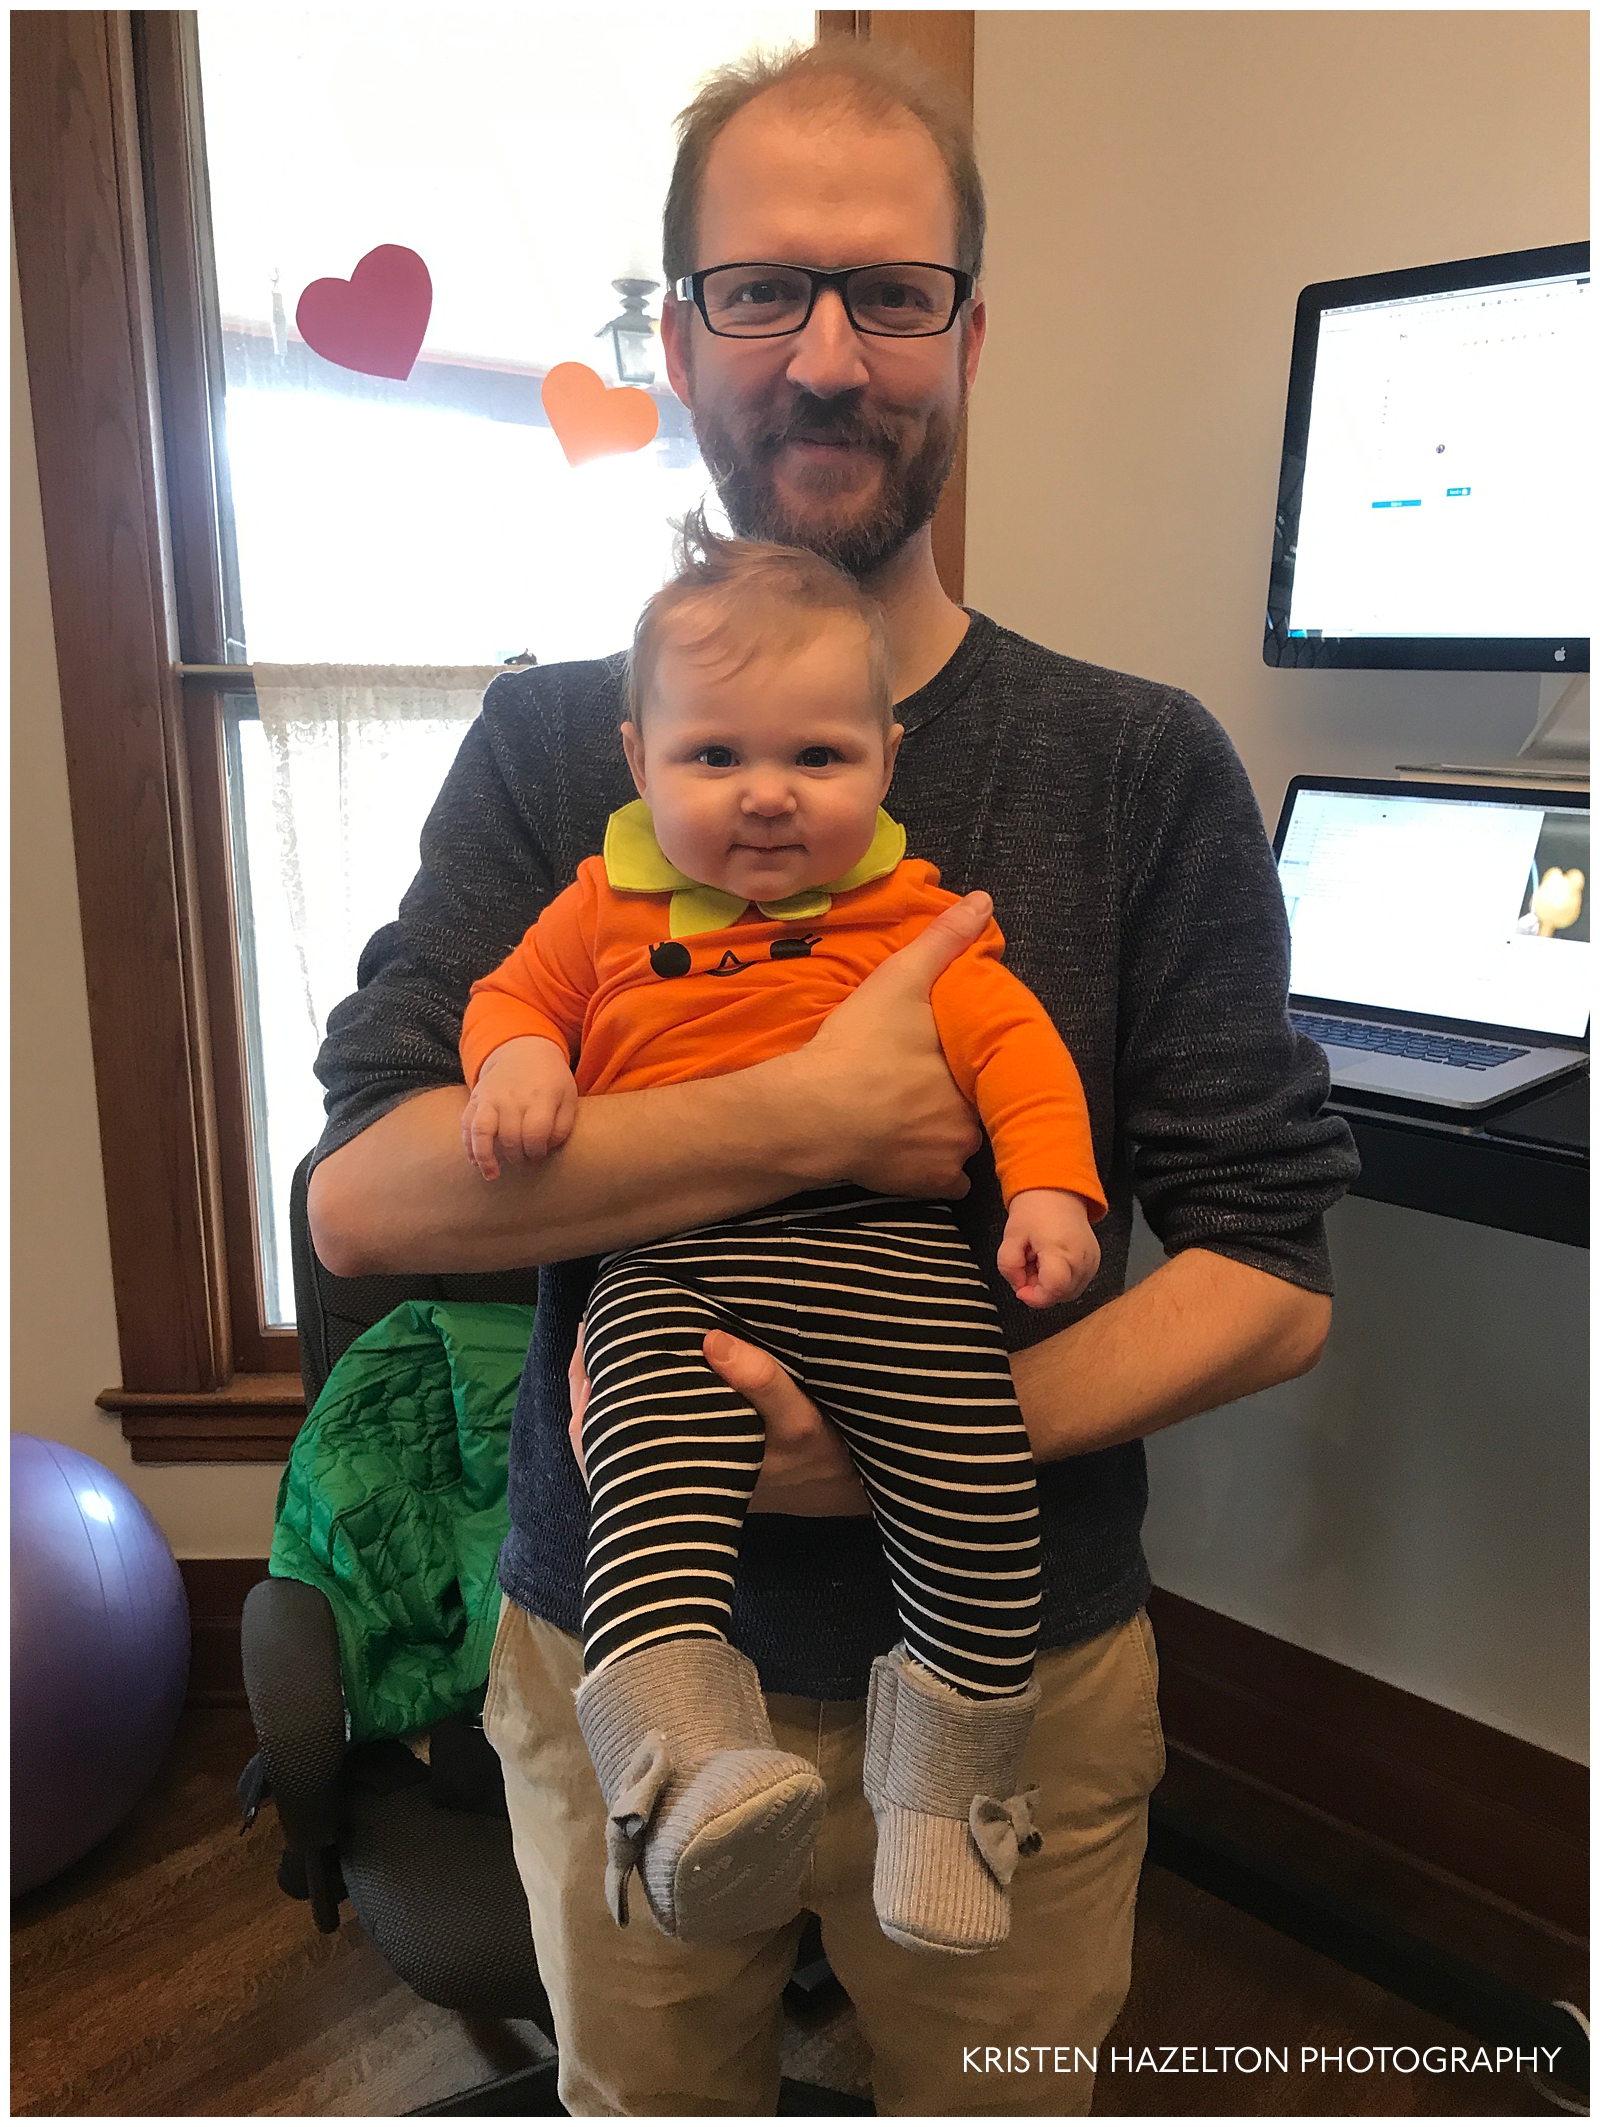 Baby in a pumpkin outfit with new gray boots